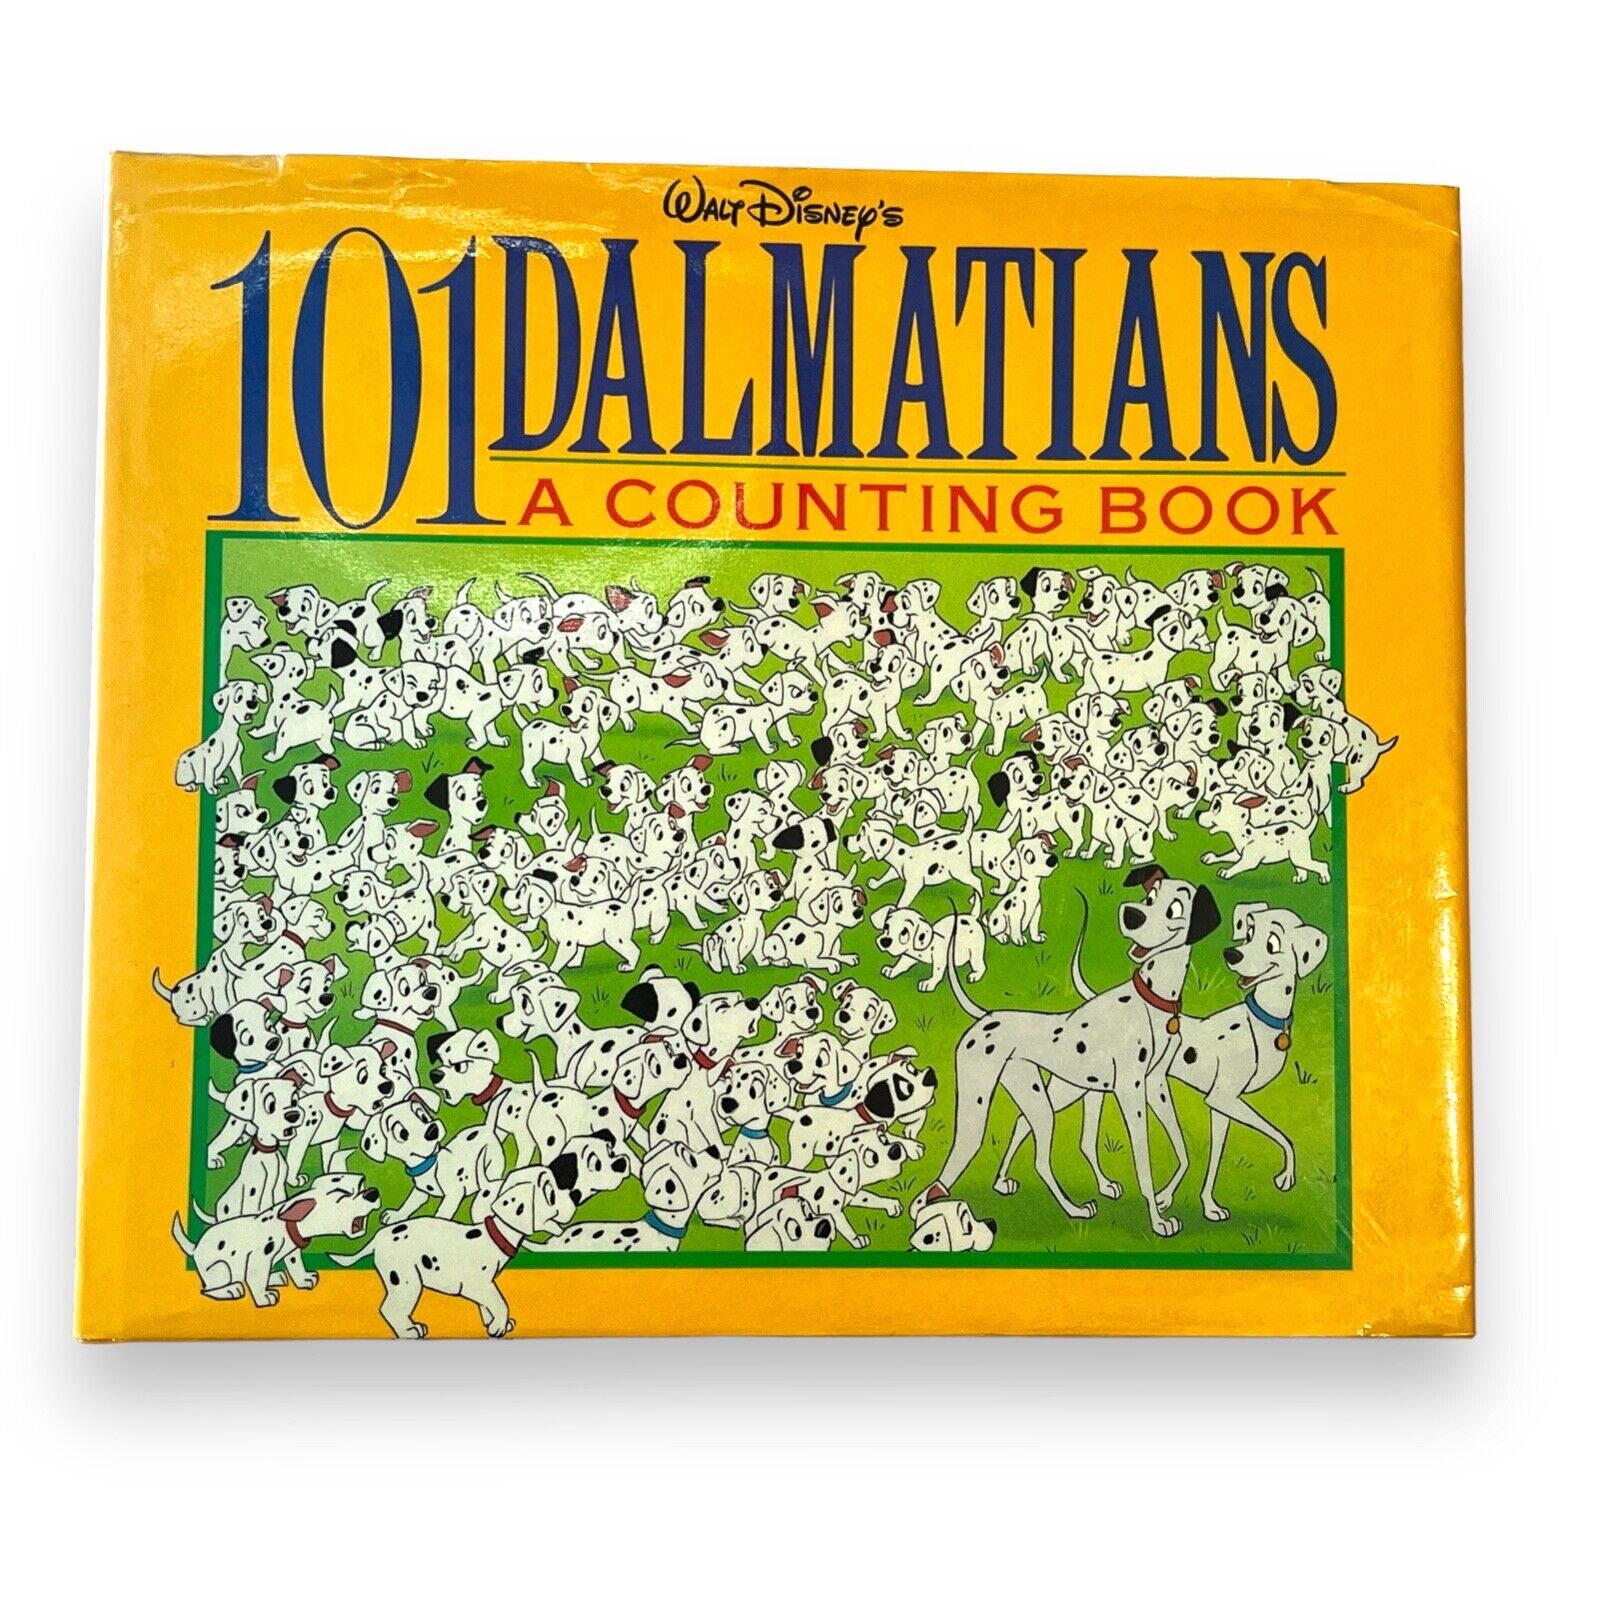 Vintage Walt Disney\'s 101 Dalmatians A Counting Book 1991 Hardcover with Jacket